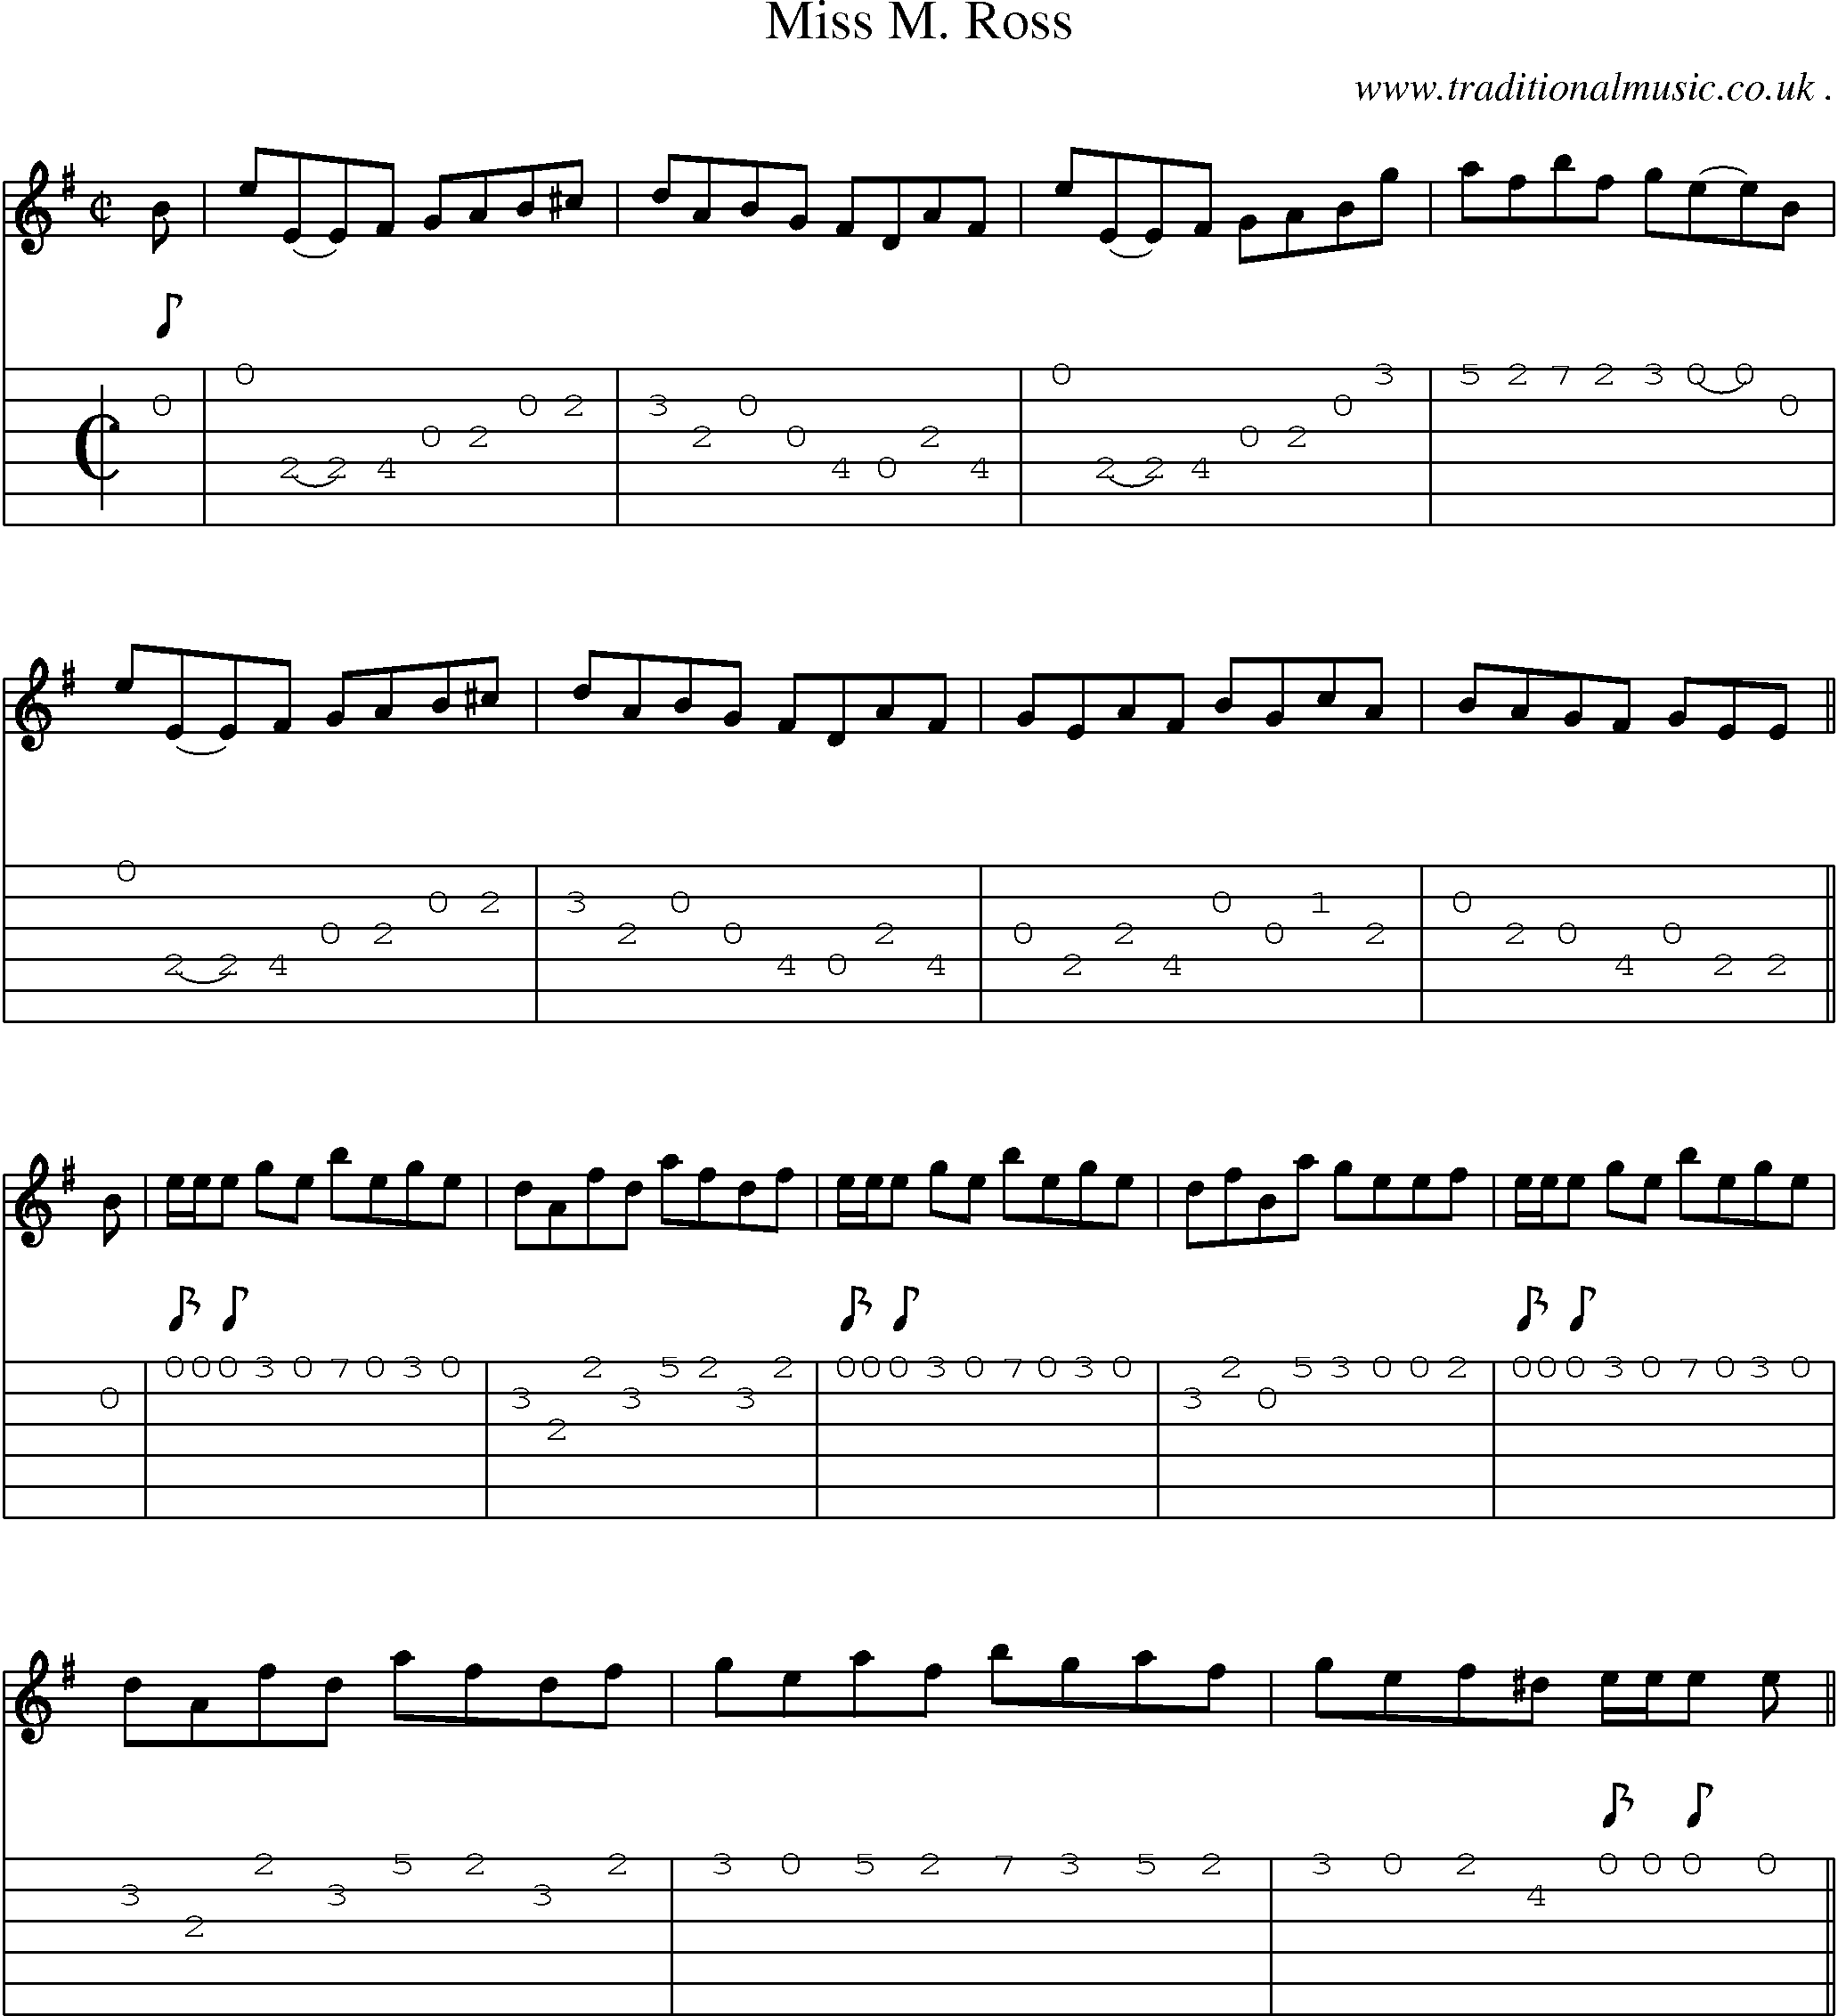 Sheet-music  score, Chords and Guitar Tabs for Miss M Ross